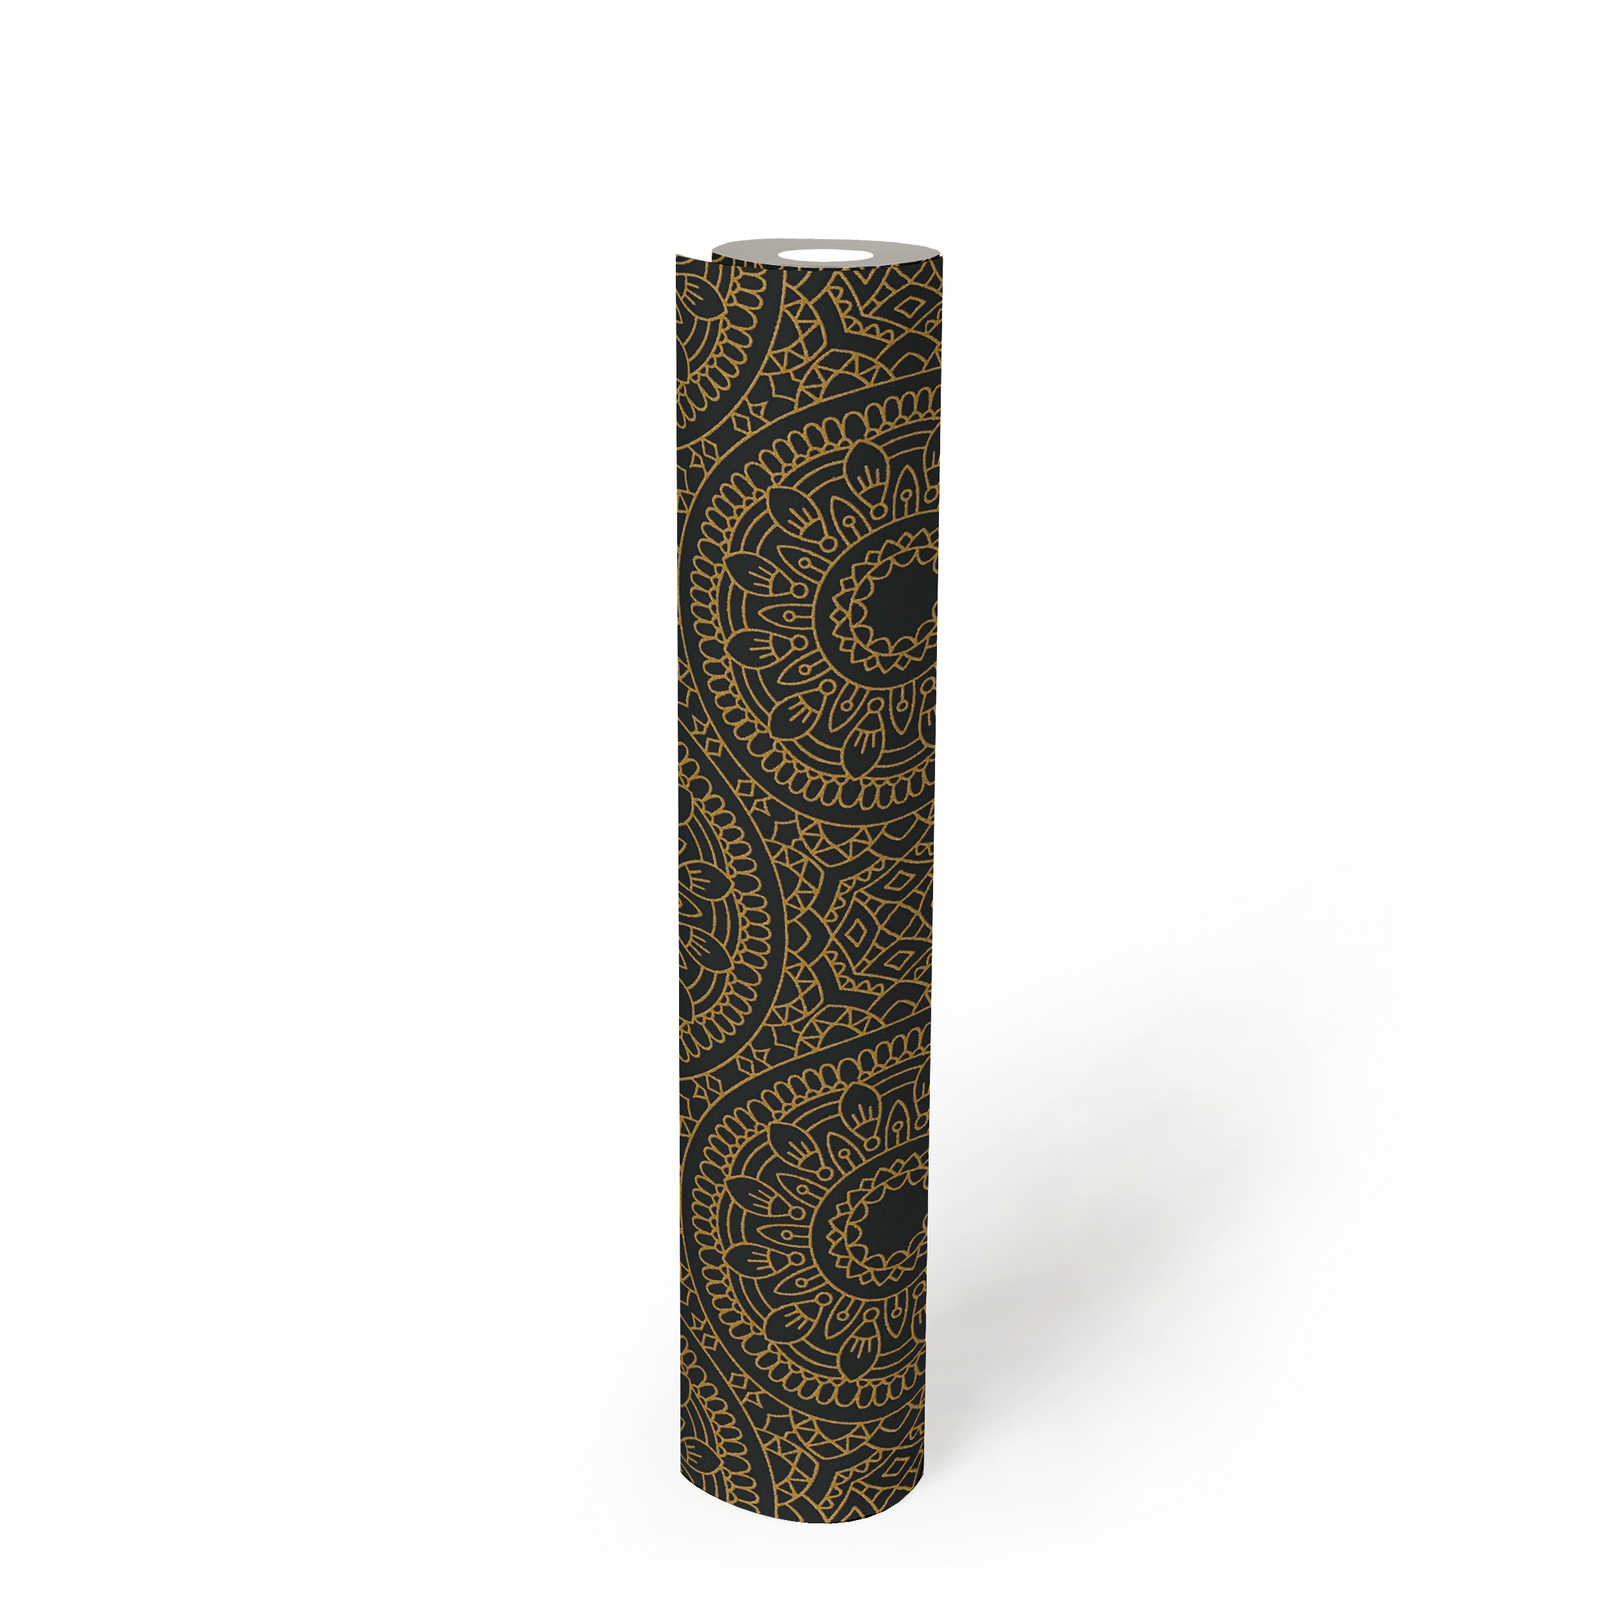             Graphic wallpaper with shiny circle pattern smooth - Black, Gold
        